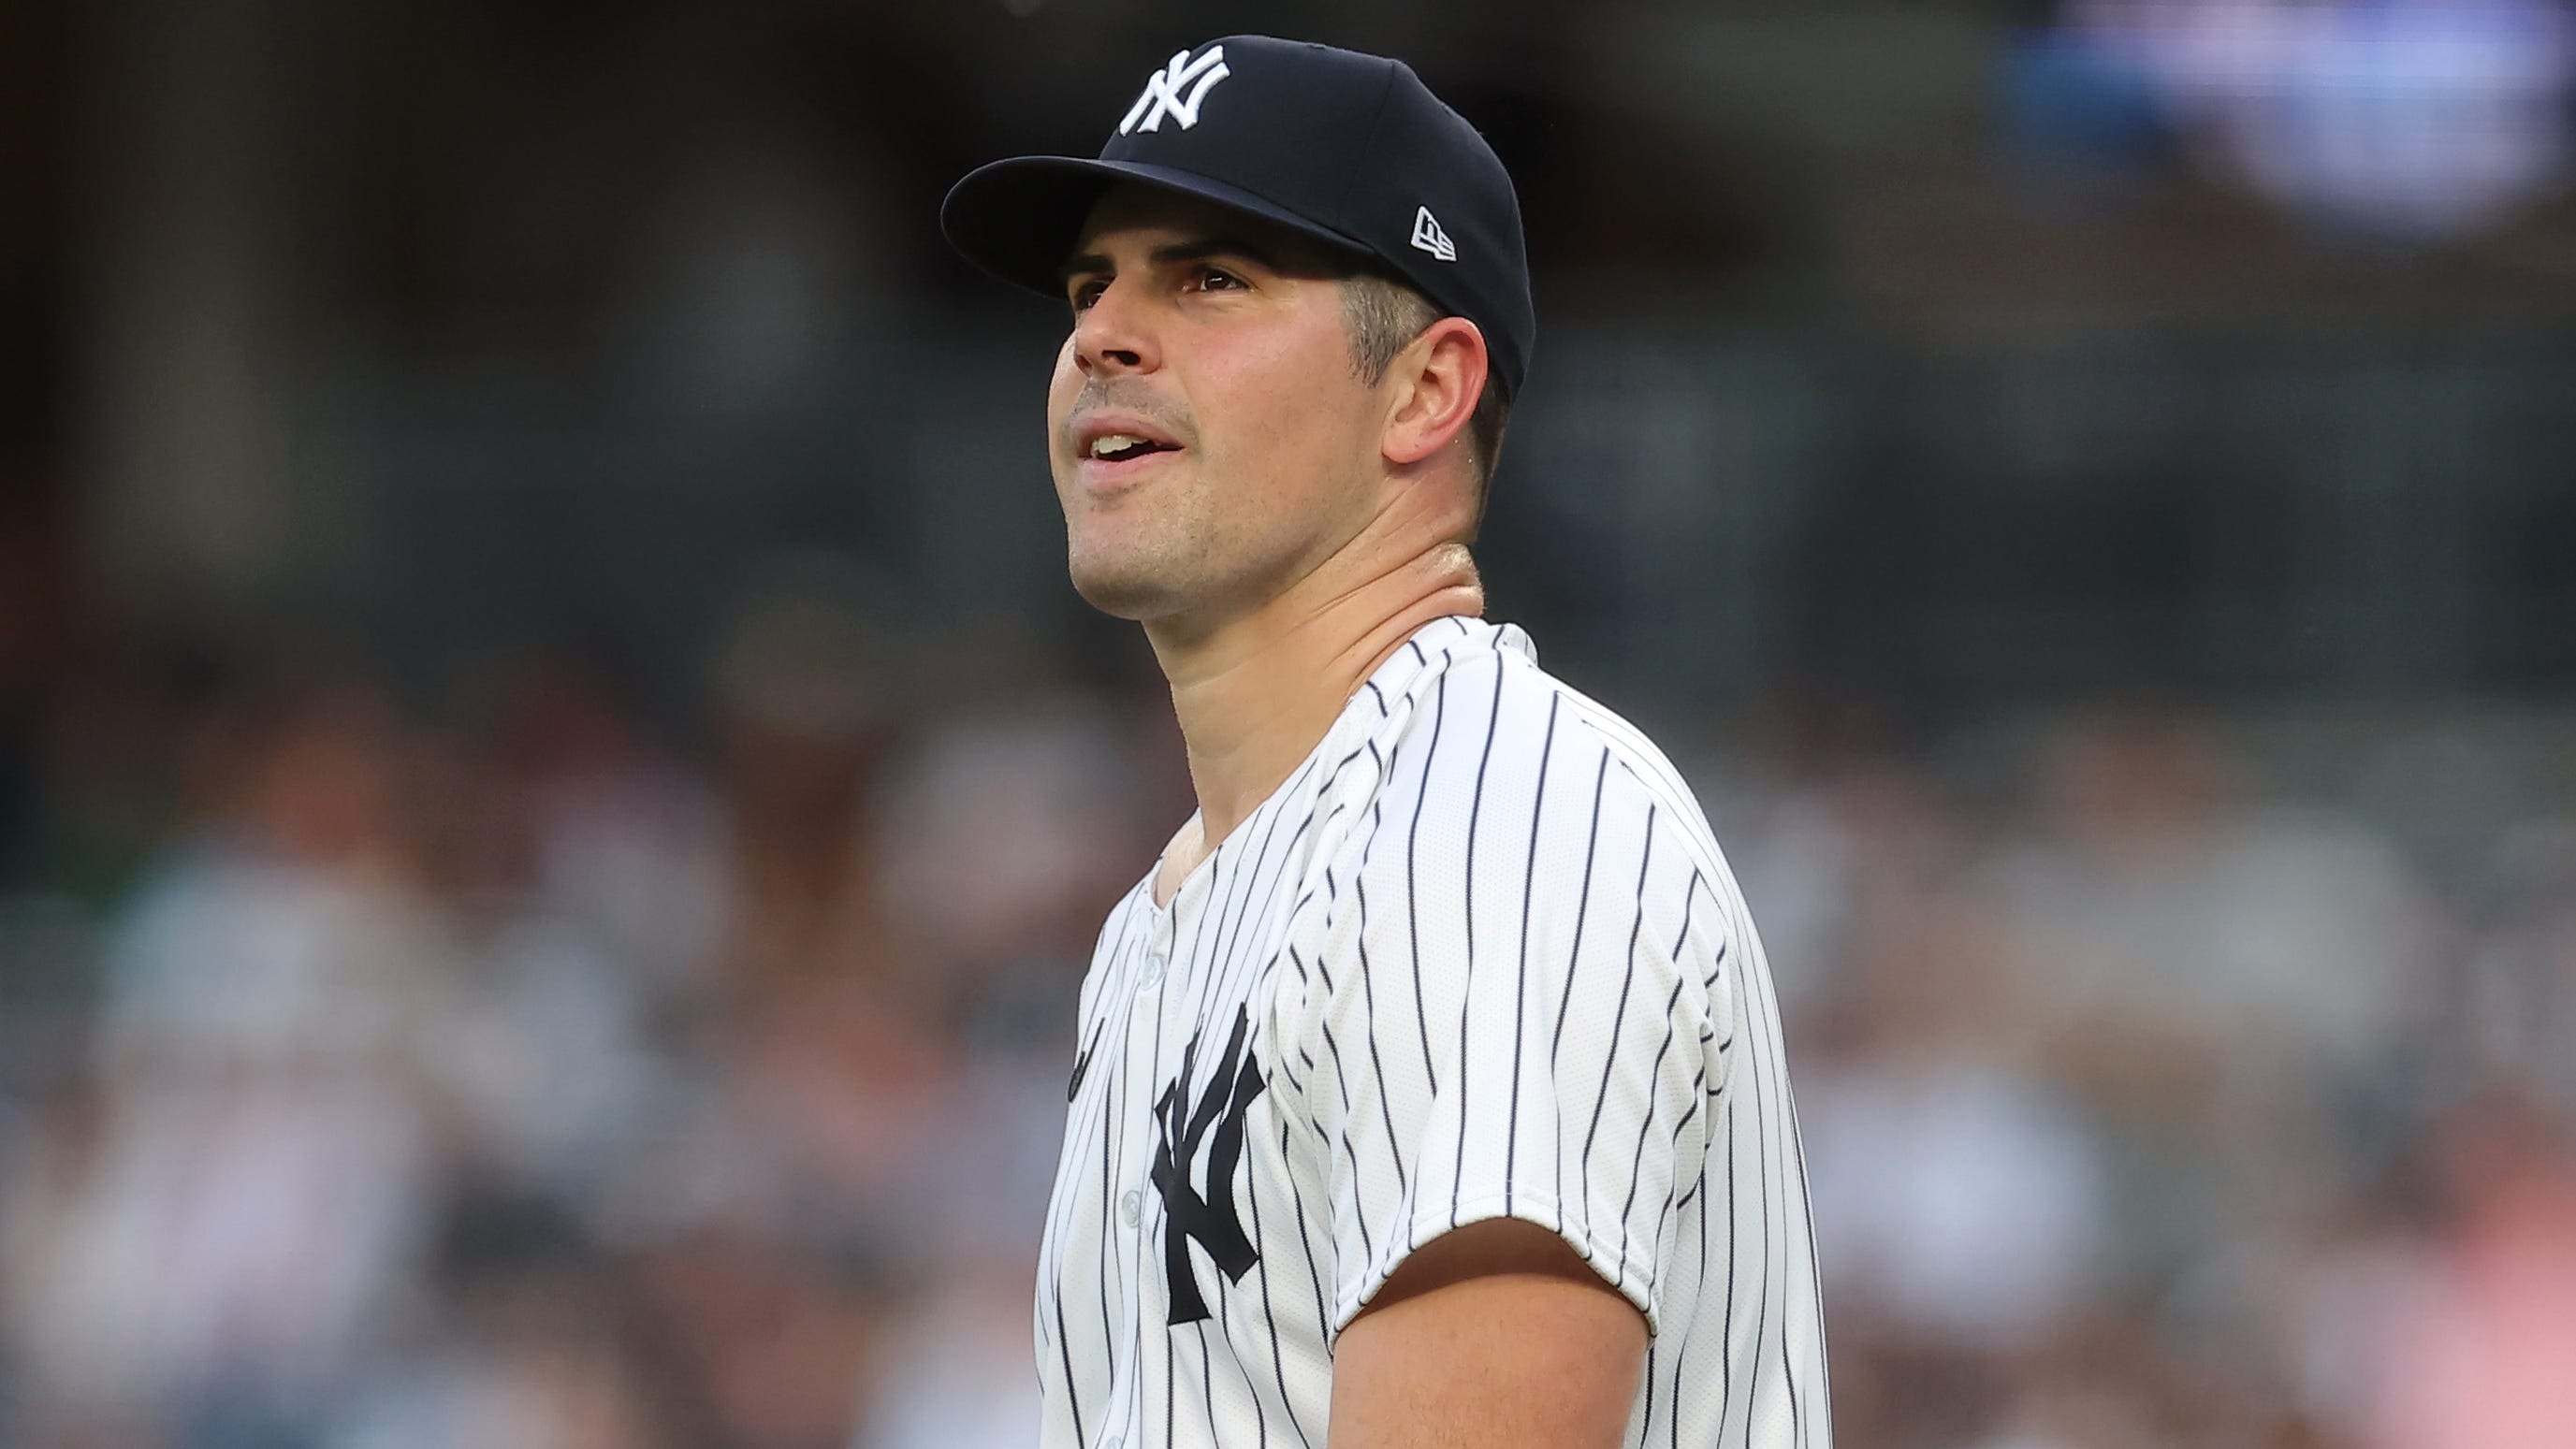 'Feels like home': After rocky 2023 season, Carlos Rodon is enjoying success with Yankees